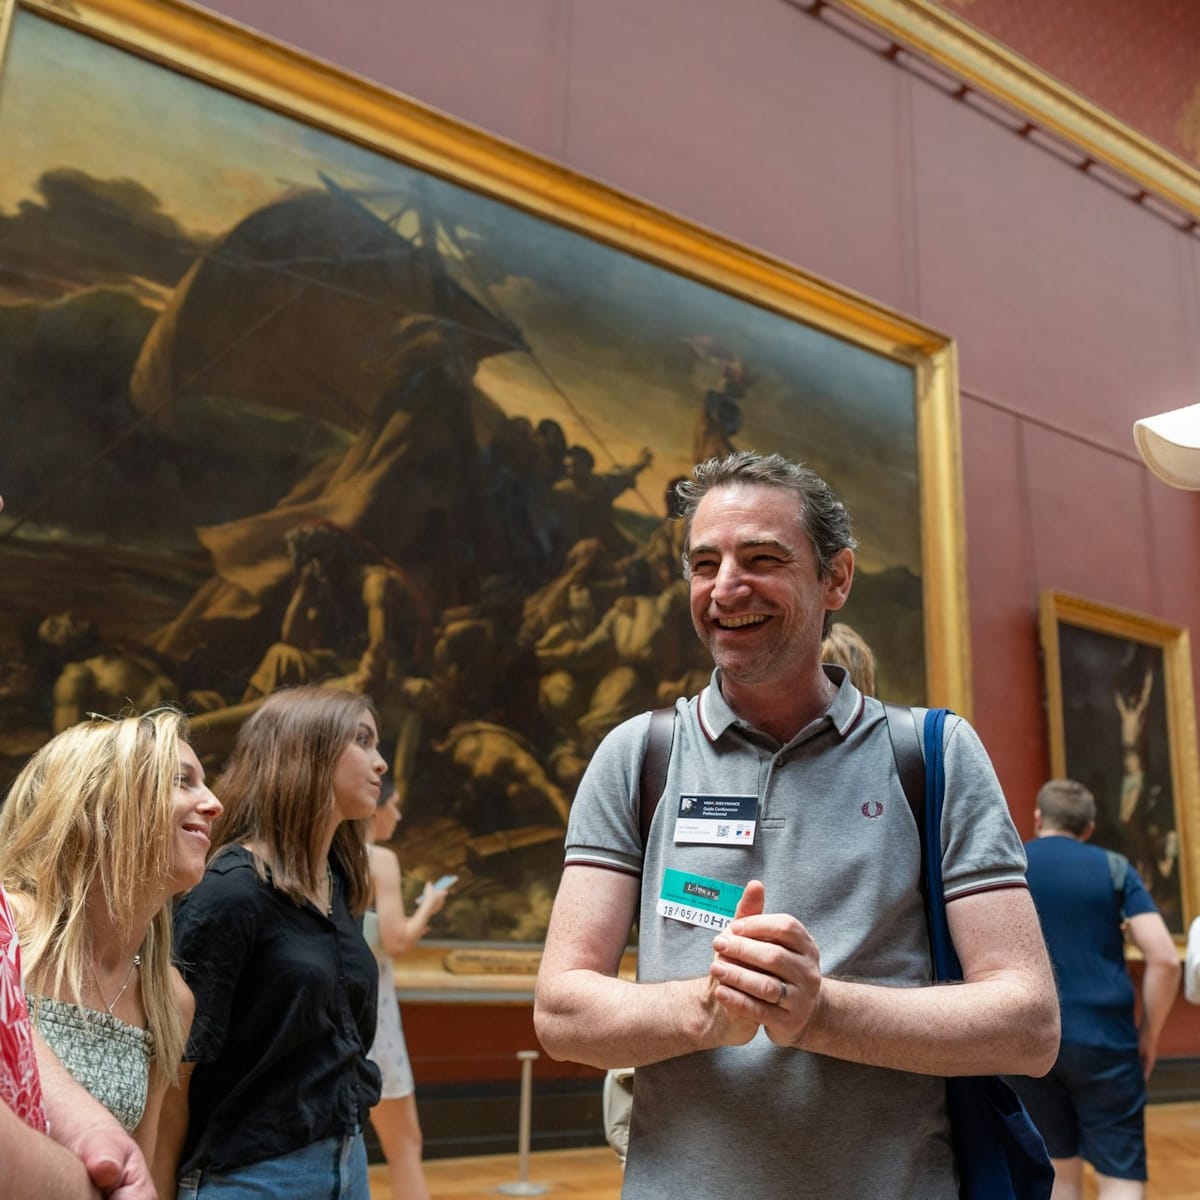 louvre-museum-priority-entry-ticket-1-5-hr-guided-highlights-tour_1